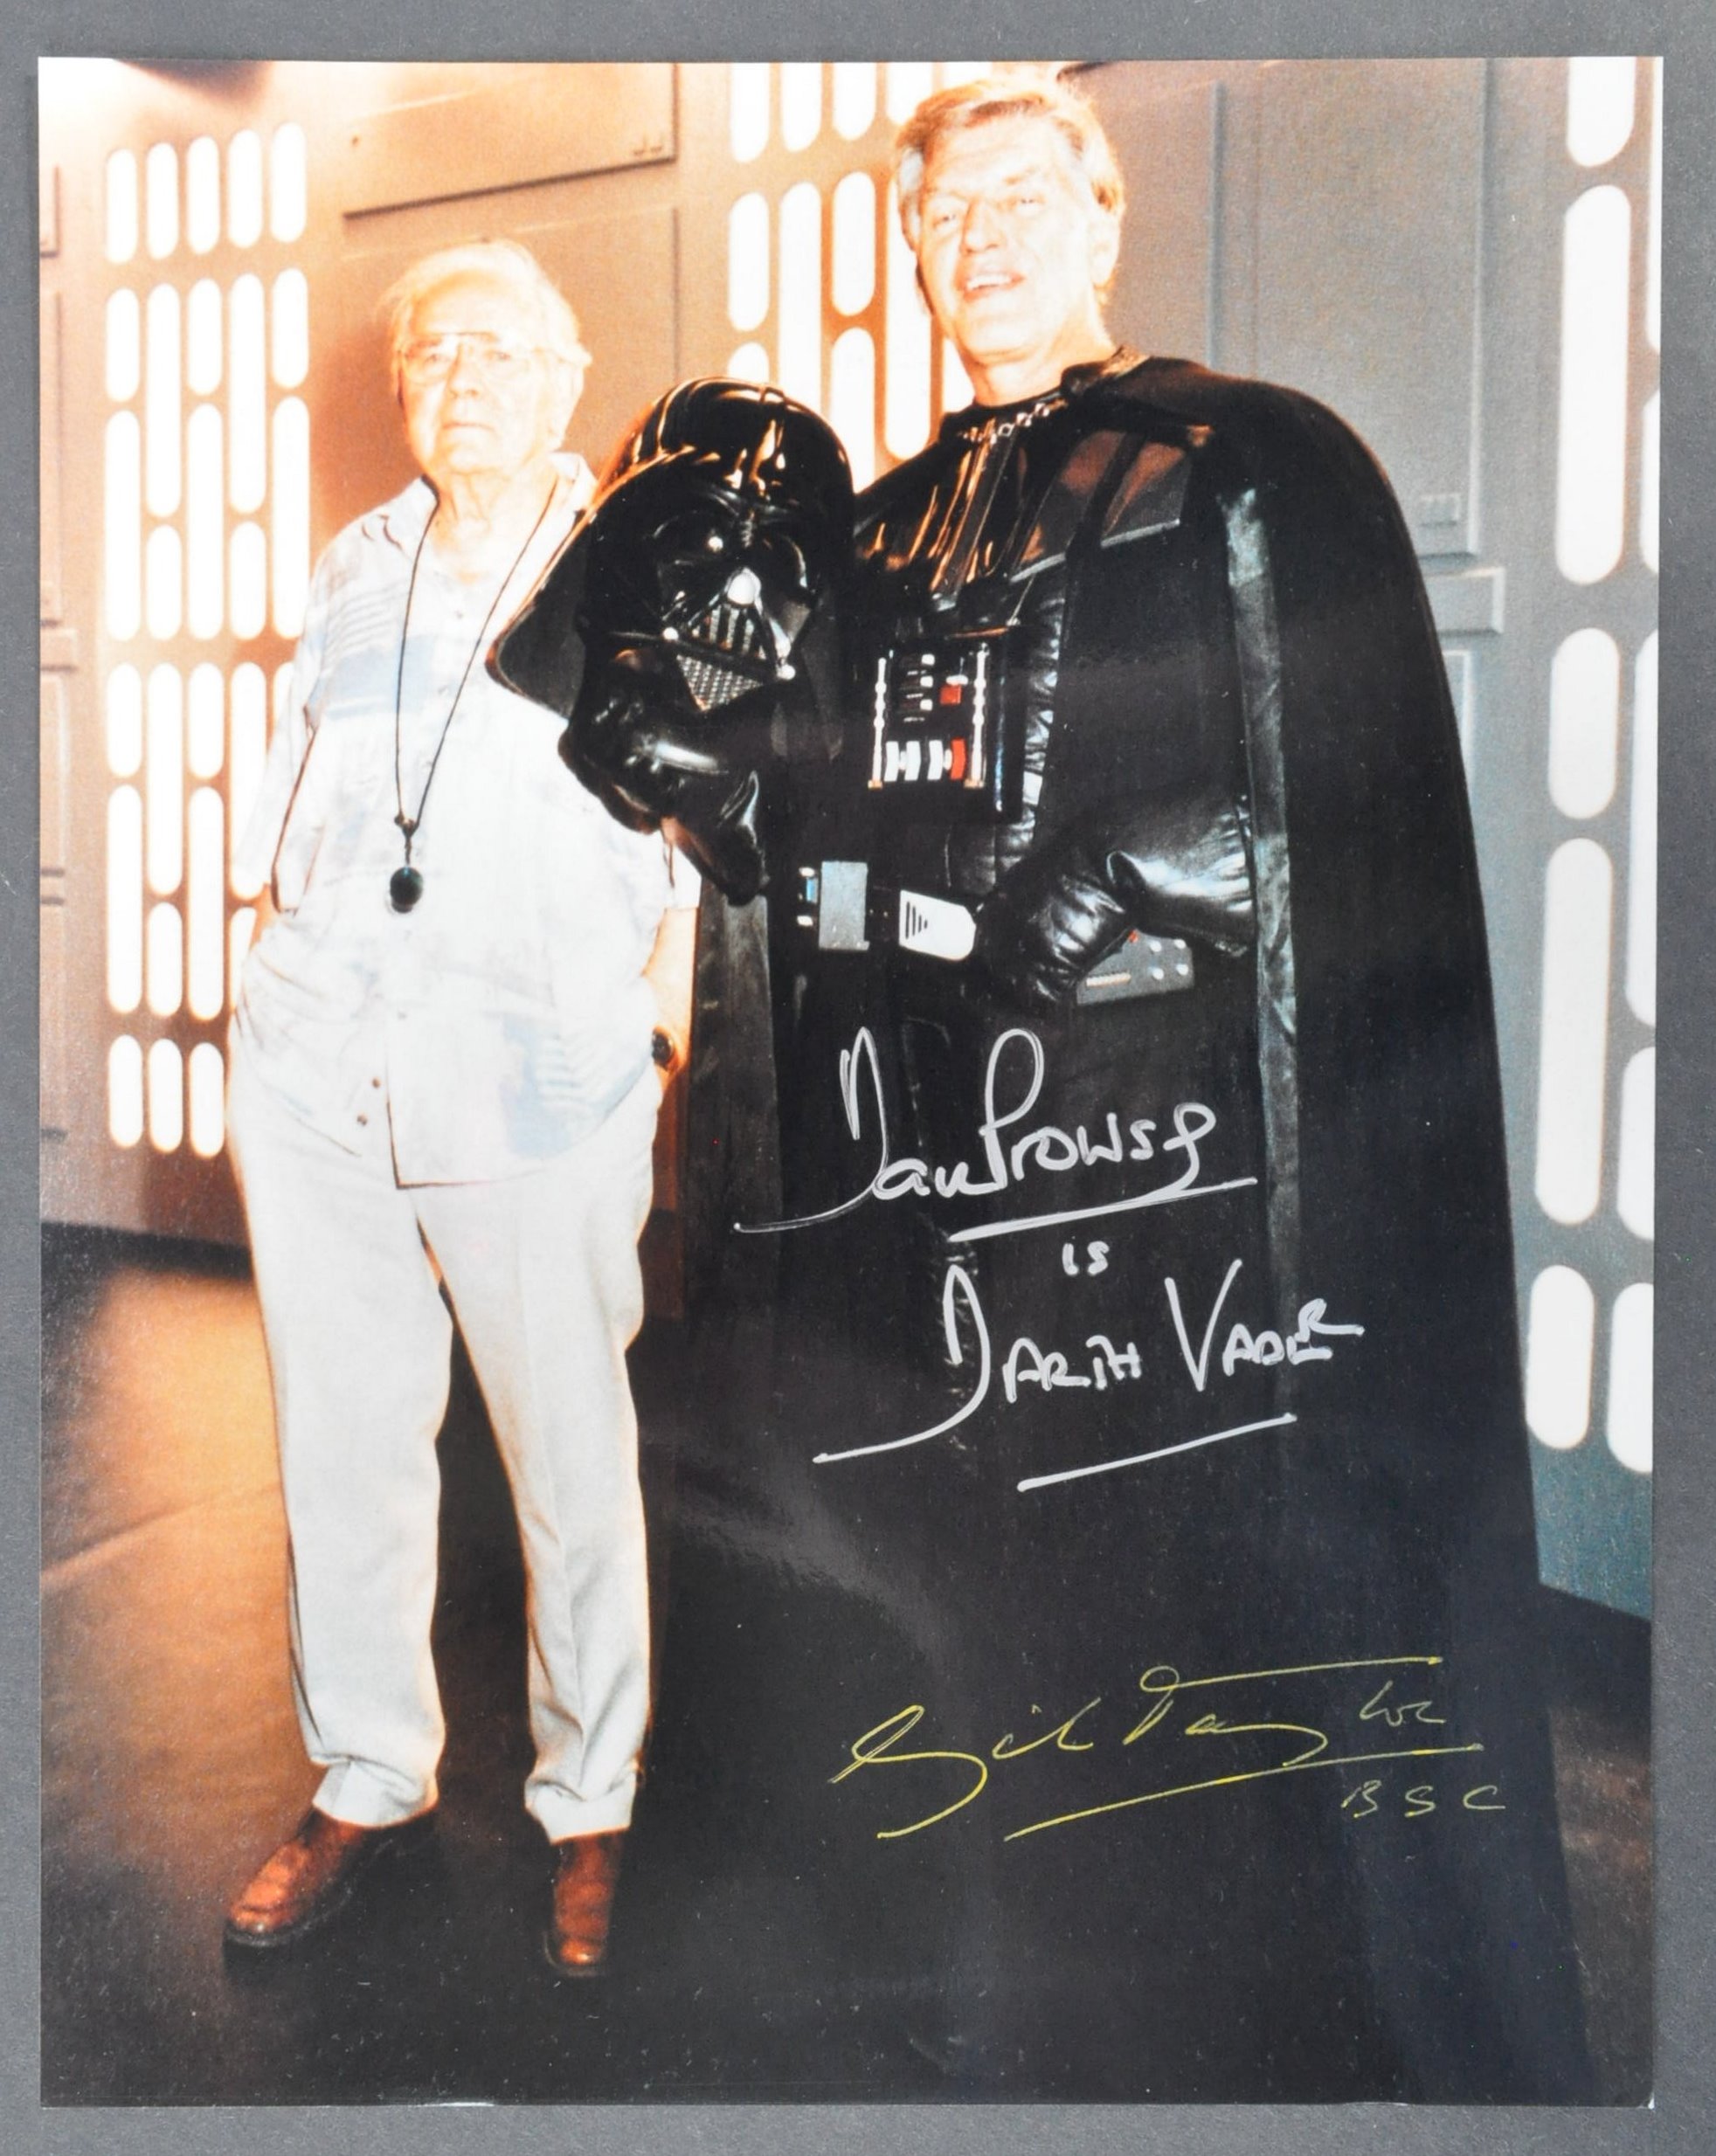 STAR WARS - DAVE PROWSE (1935-2020) & GIL TAYLOR - SCARCE SIGNED PHOTO